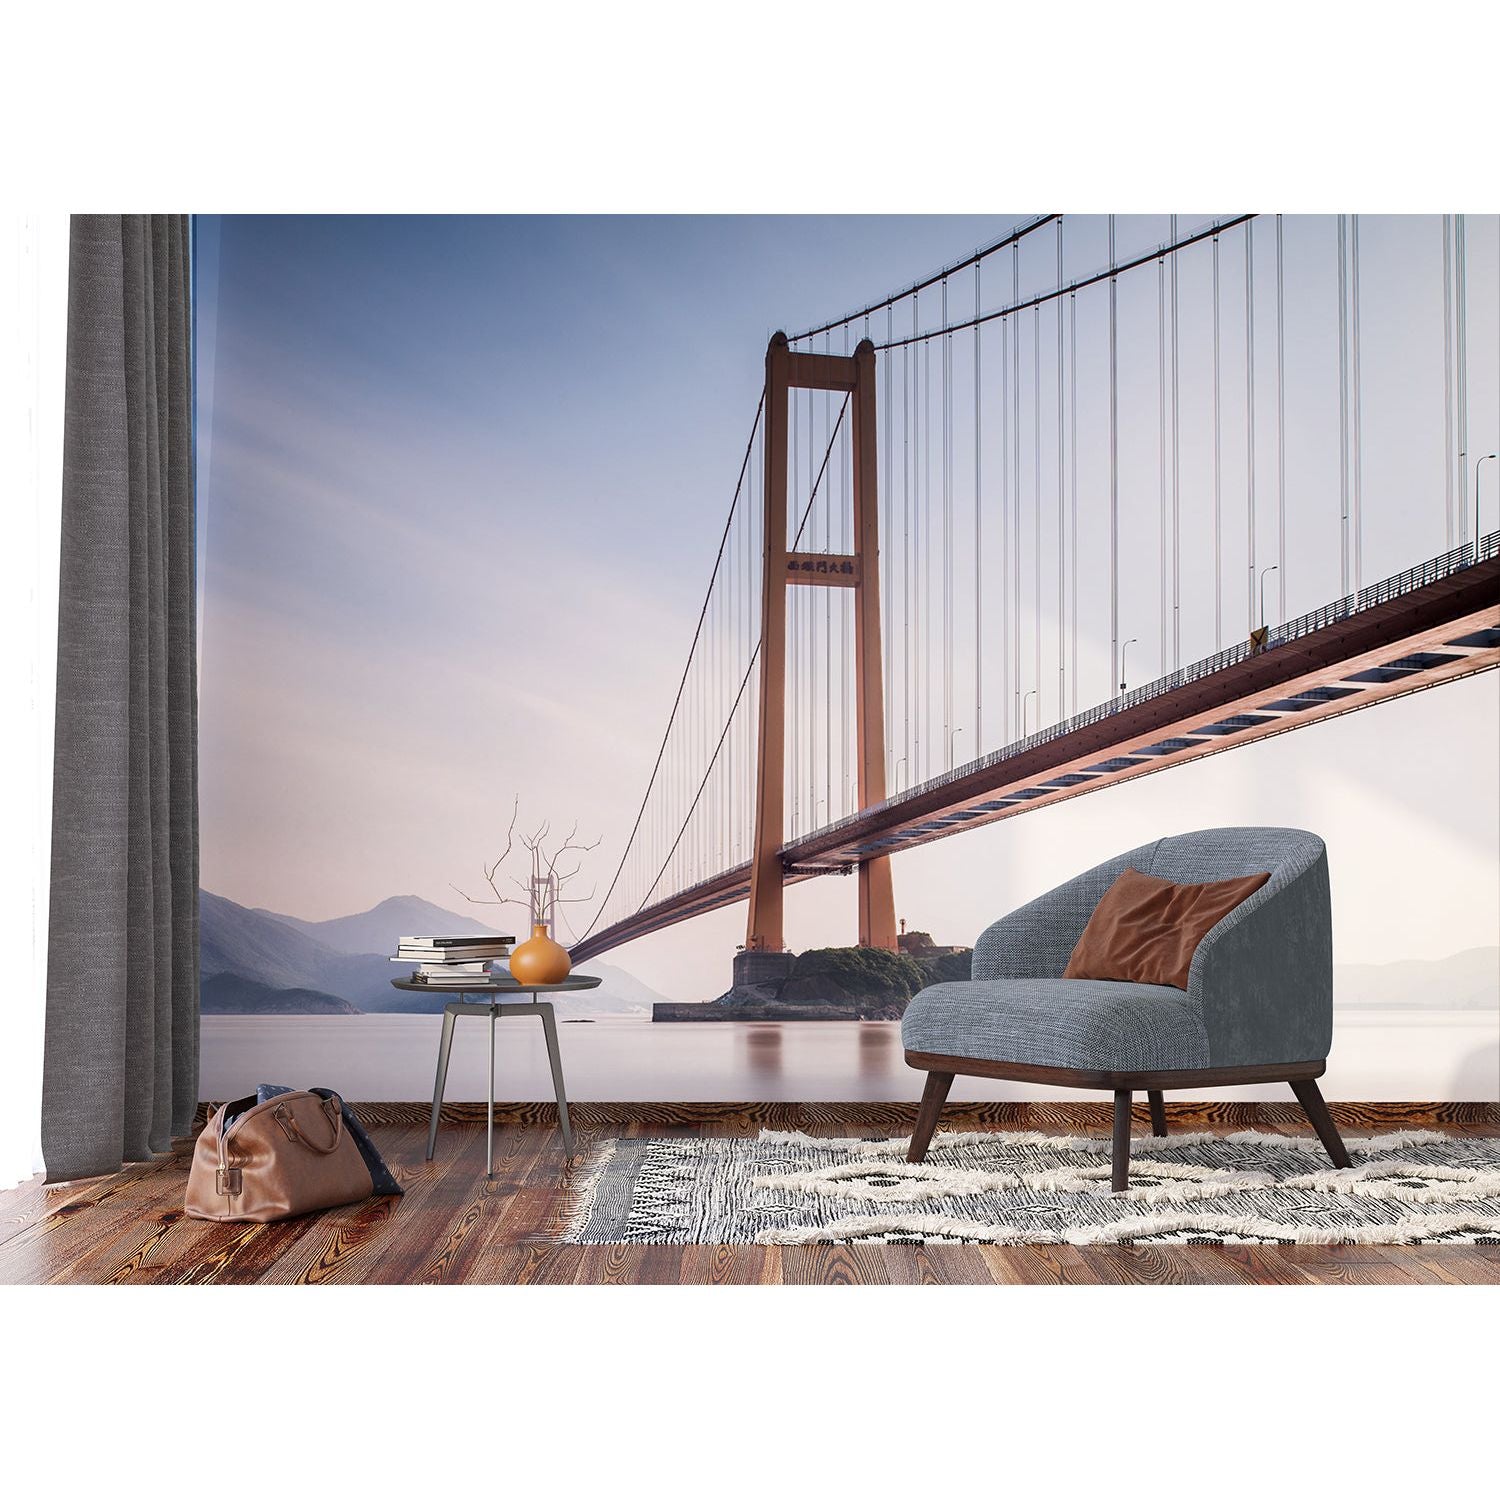 Overpass Oasis: Wall Mural of a Majestic Bridge Over Clear Waters